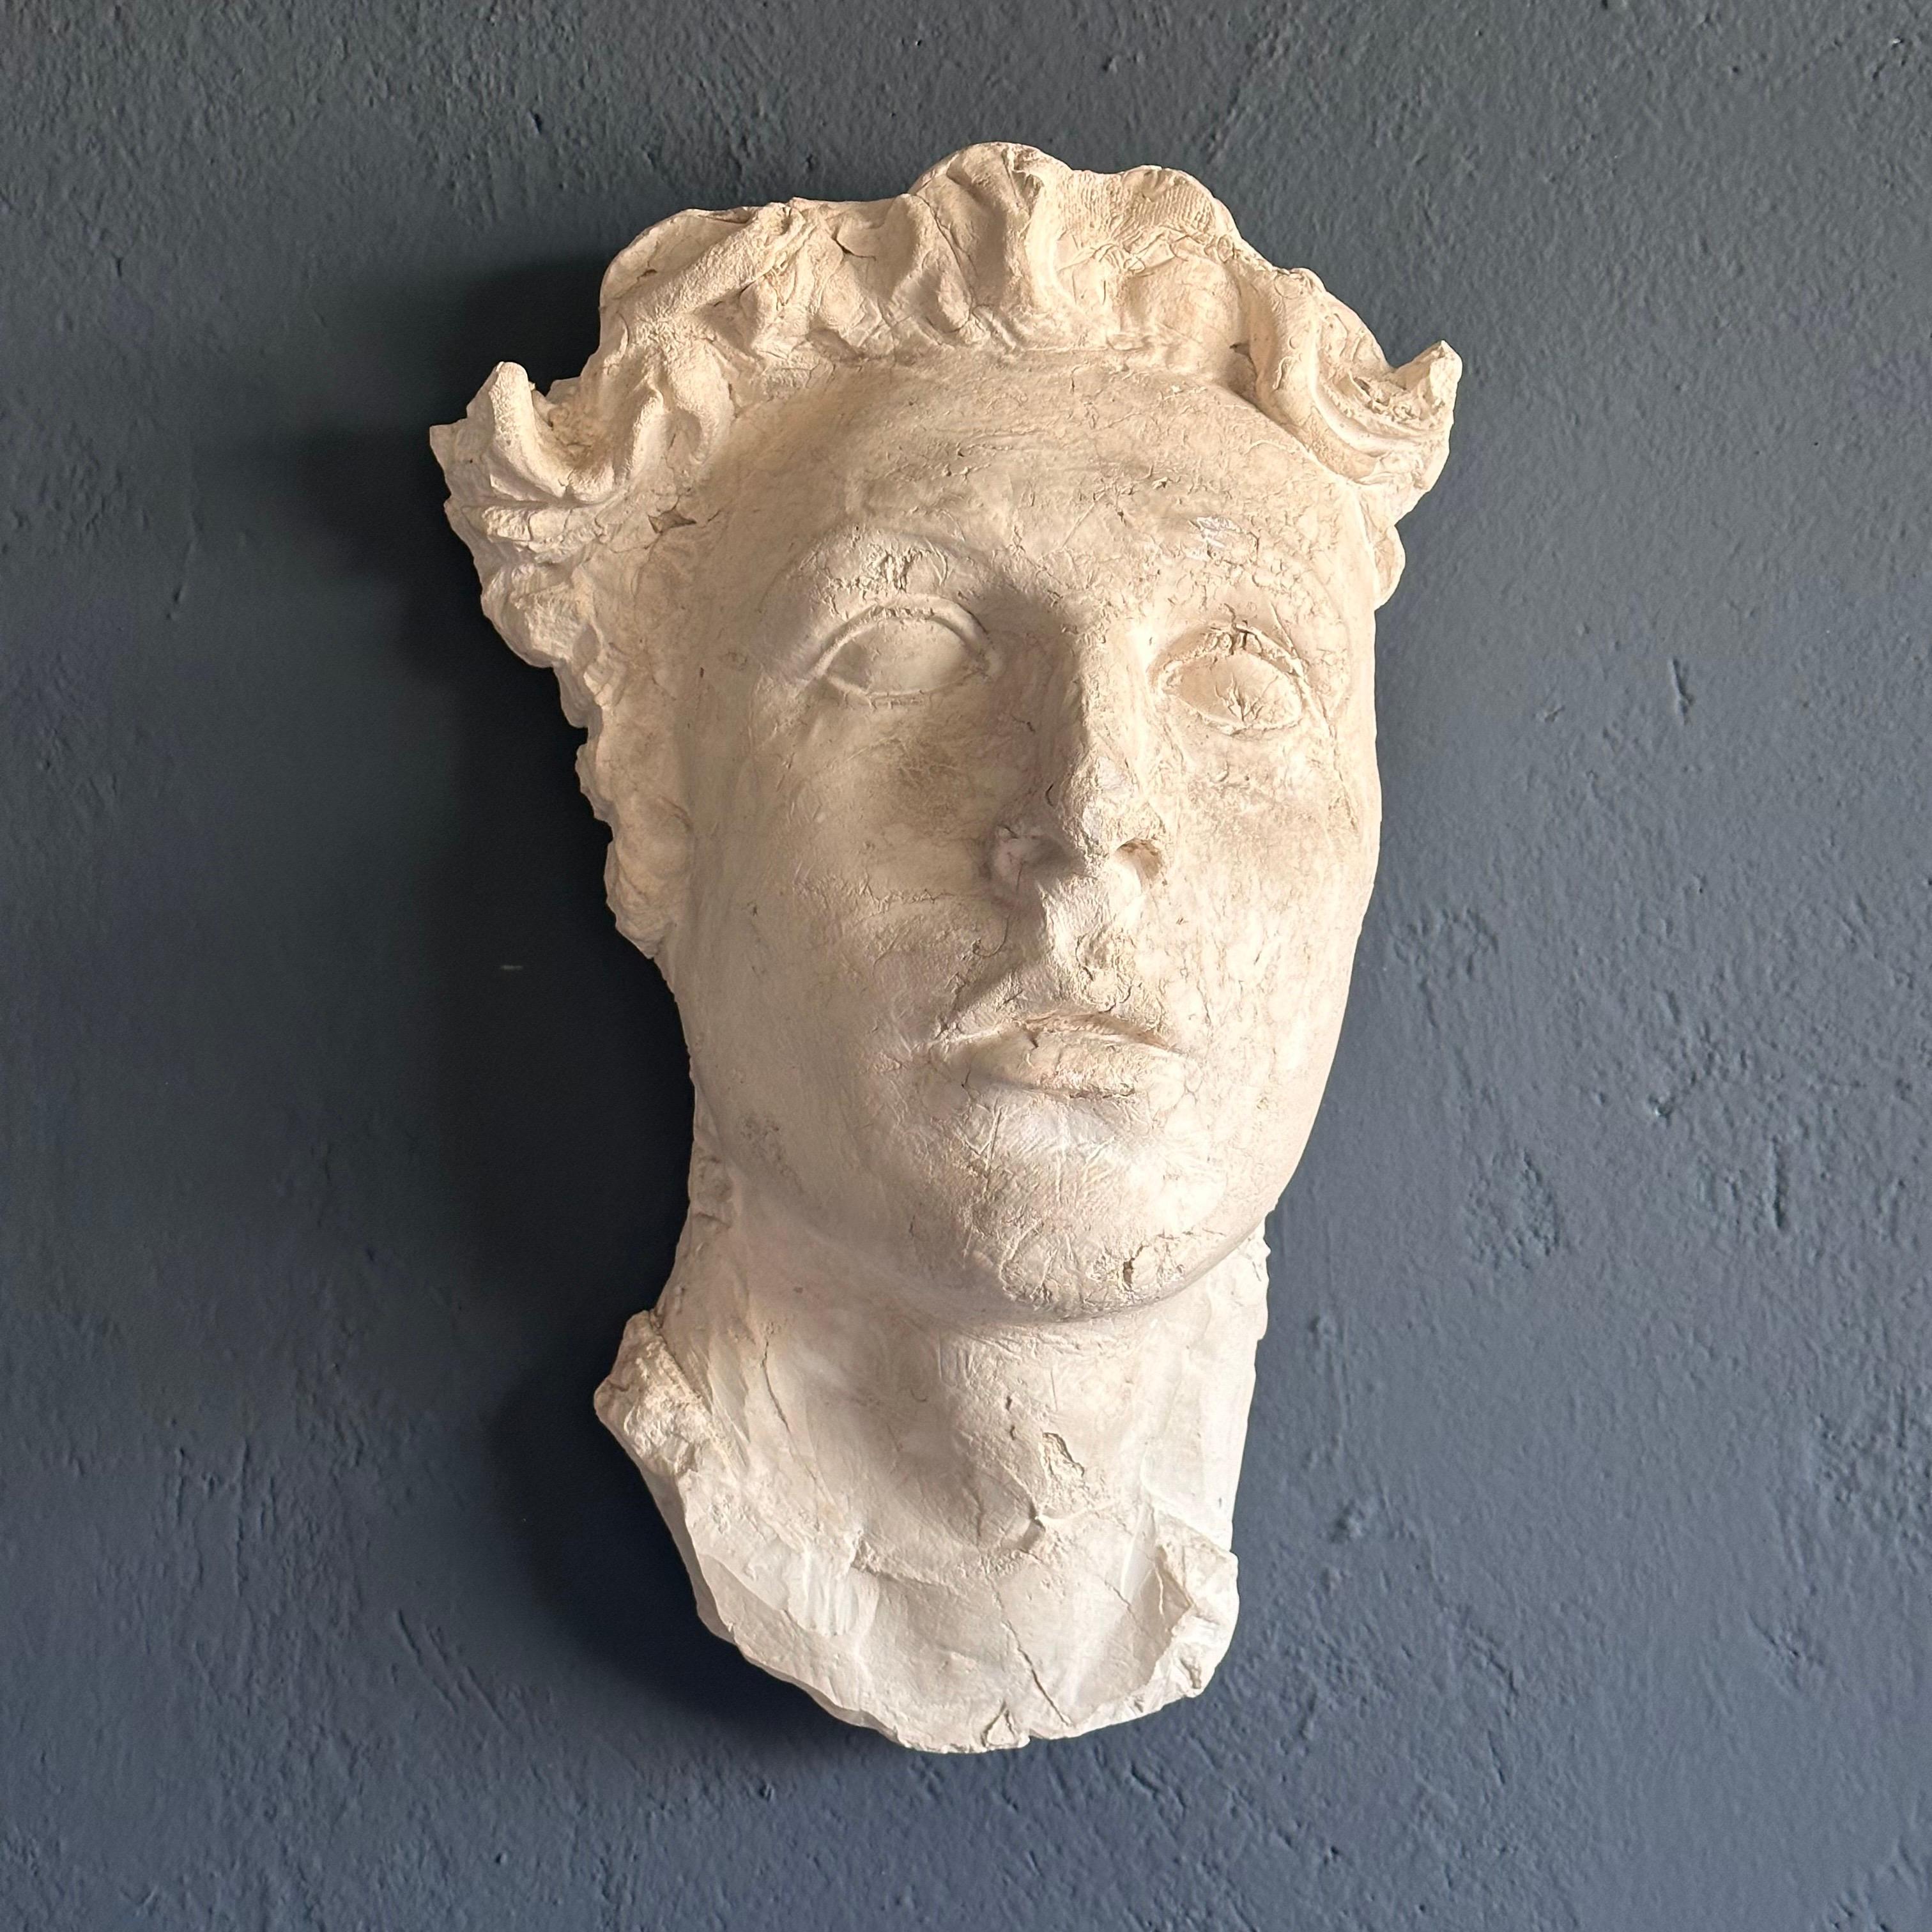 
Transport yourself to ancient Rome with this exquisite decorative gypsum face, a faithful reproduction from the 1970s that captures the timeless allure of classical art. Crafted with meticulous attention to detail, this piece embodies the elegance